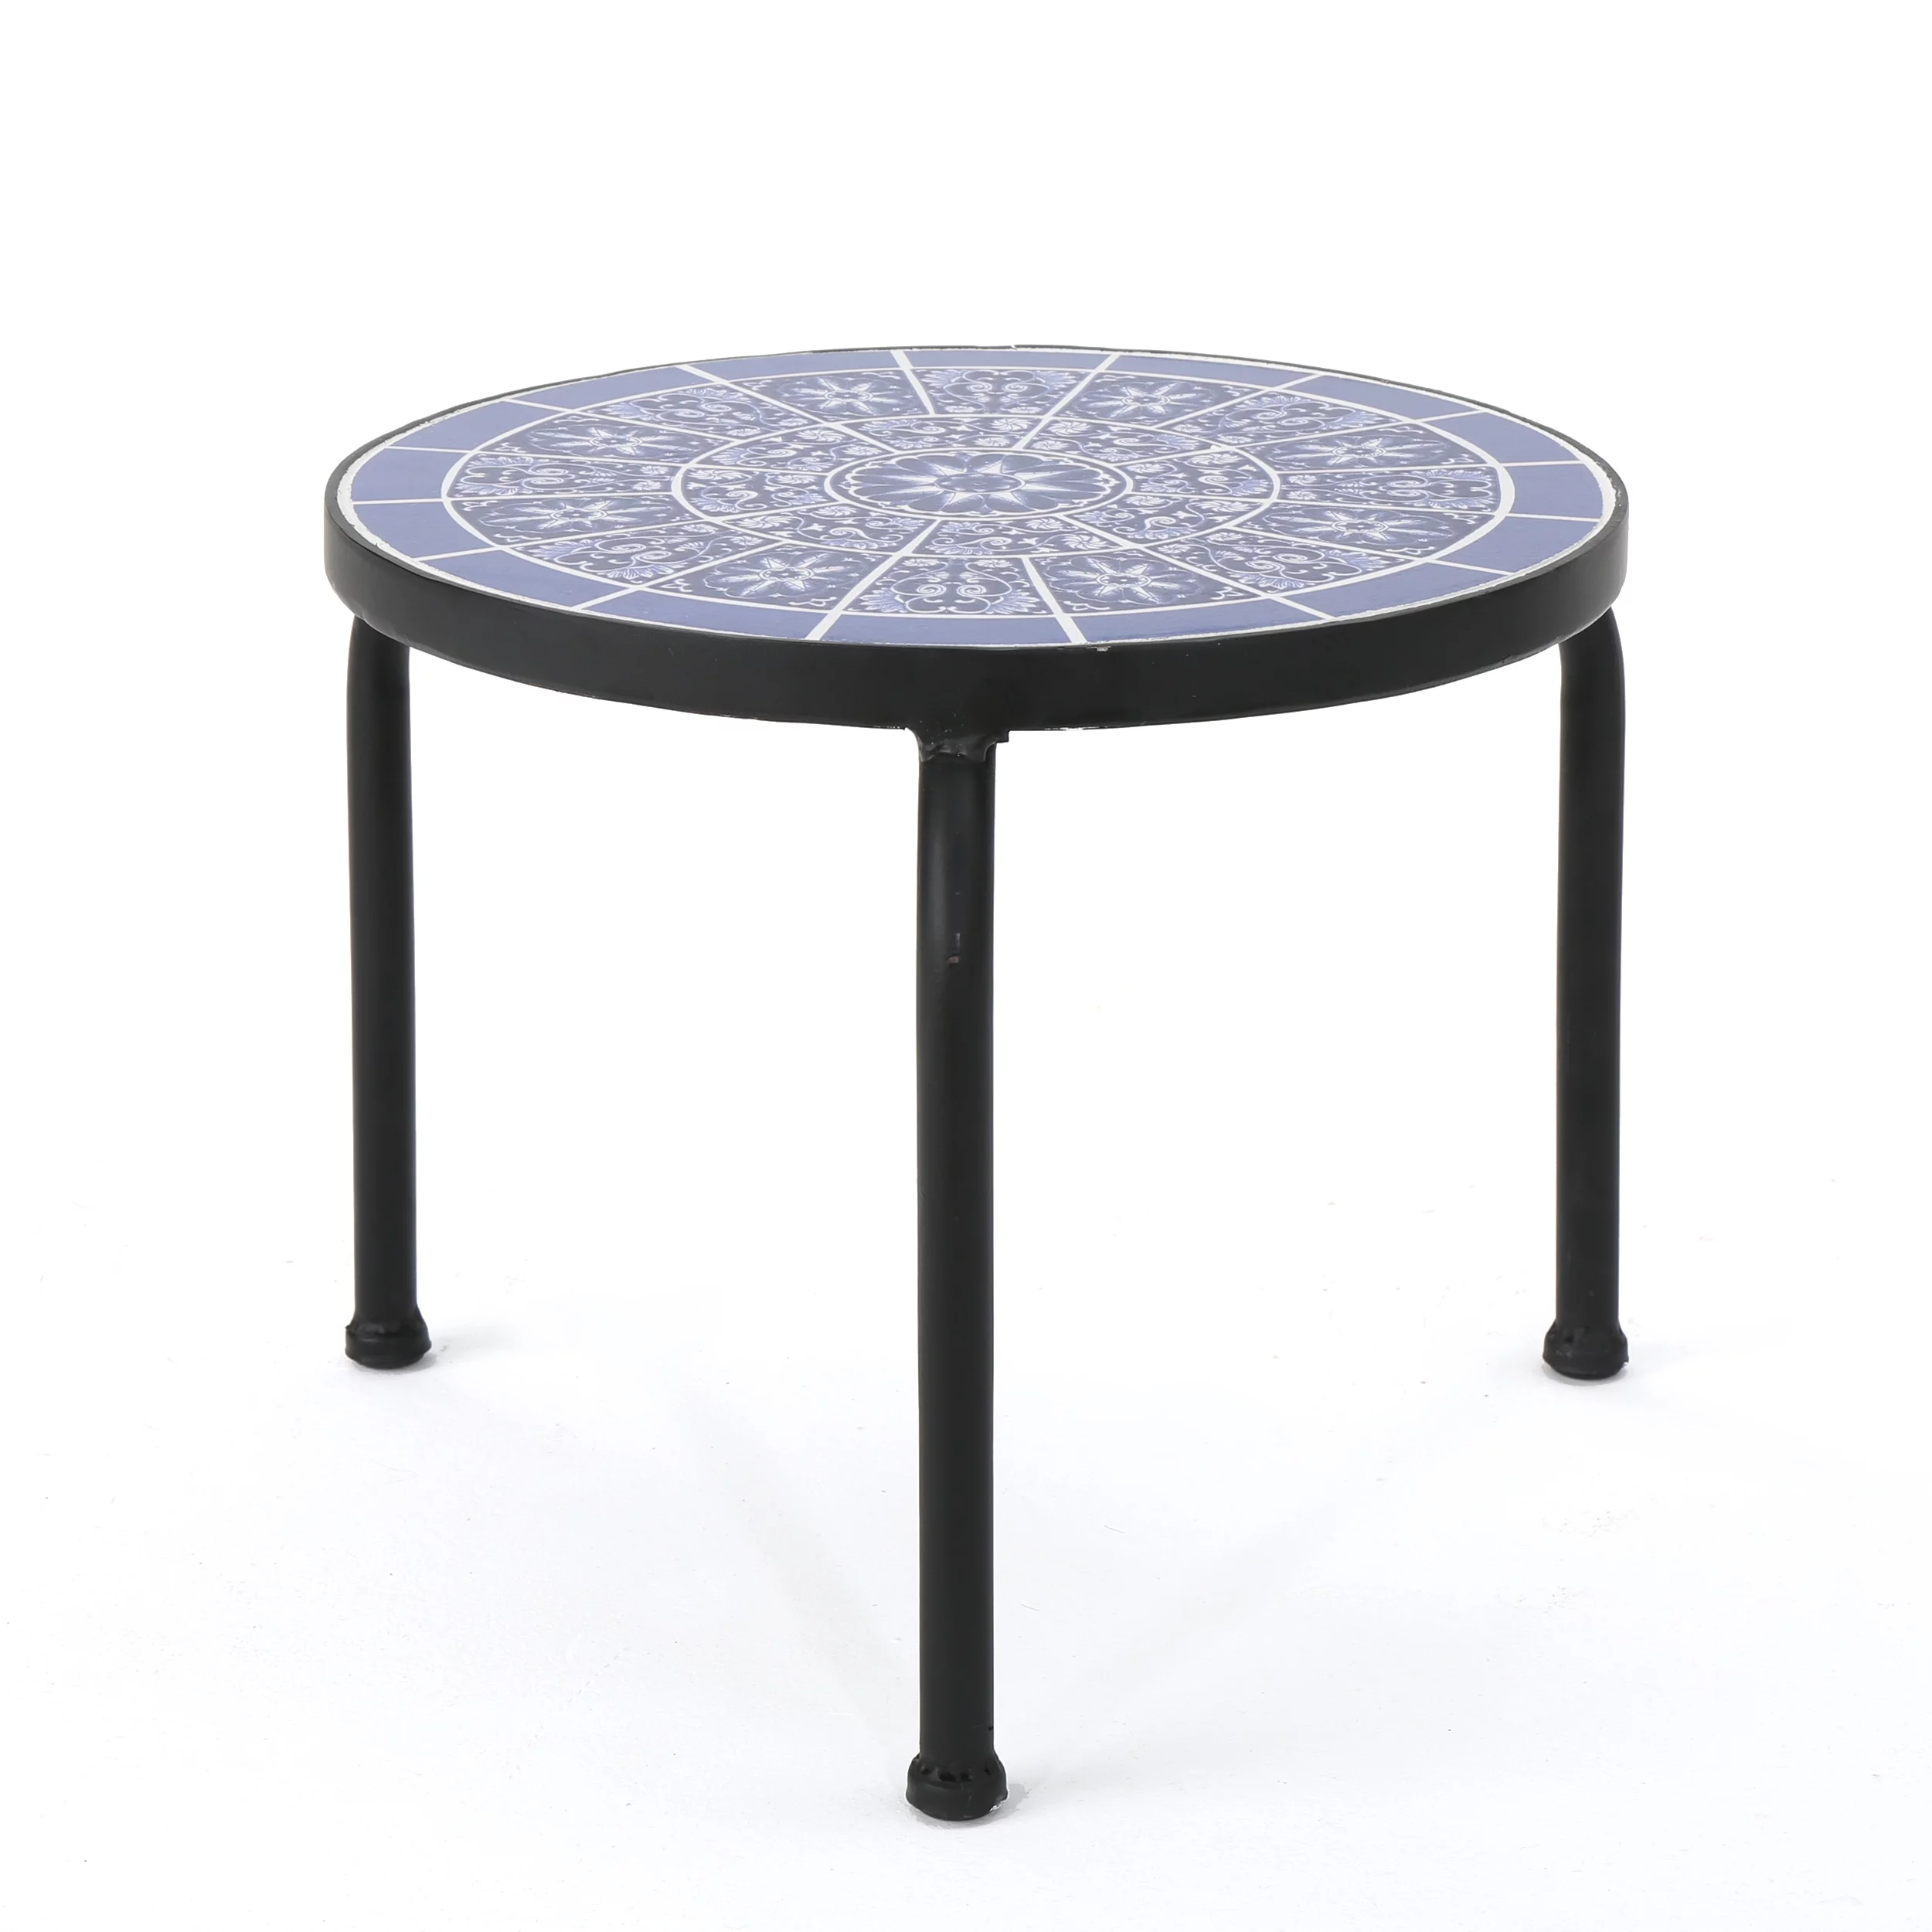 Noble House Outdoor Ceramic Tile Side Table with Iron Frame, Size: 10" (H) x 13" (W)